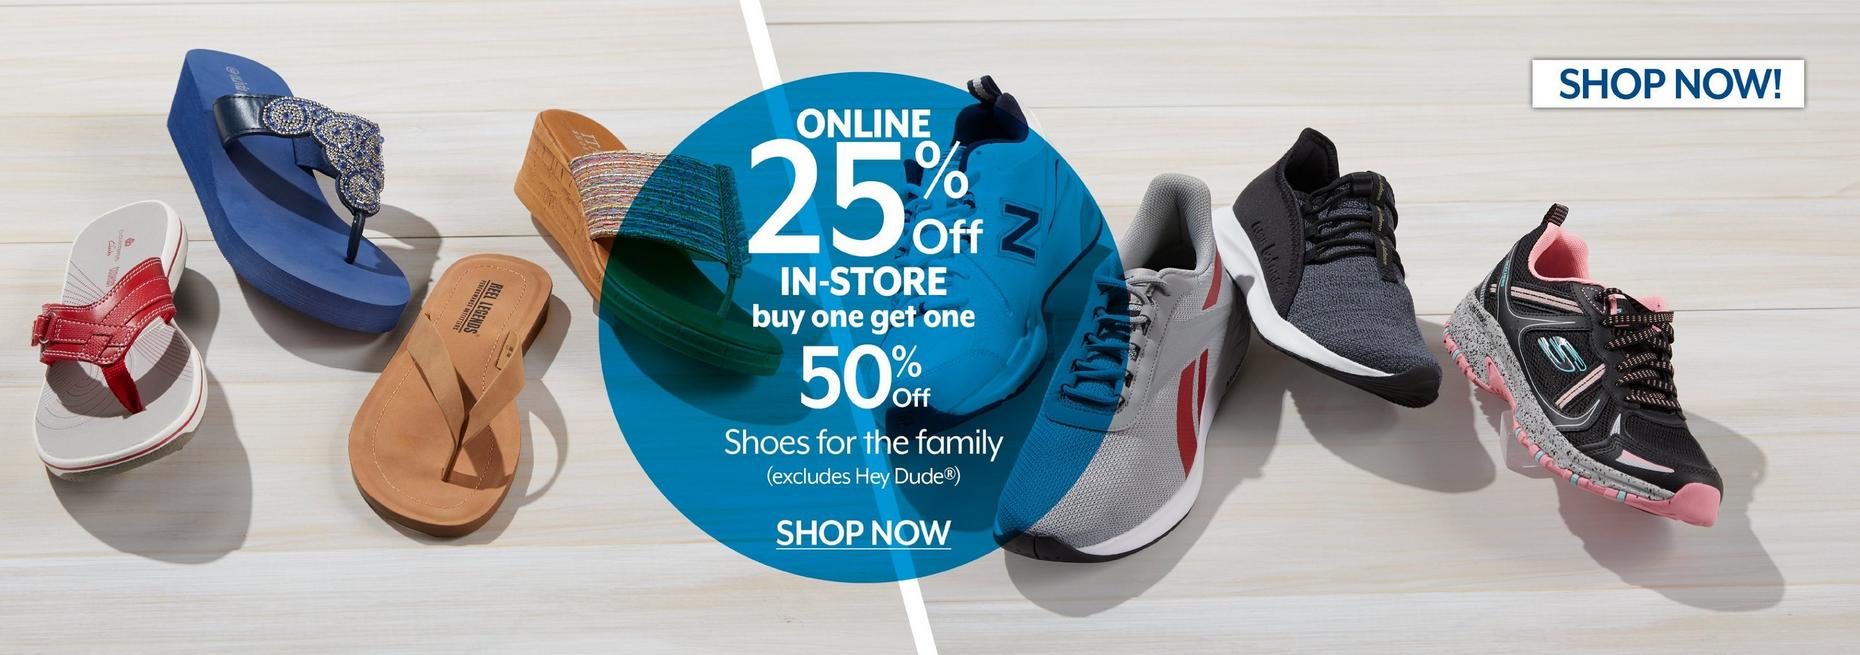 25% off Shoes for the family (excludes Hey Dude)